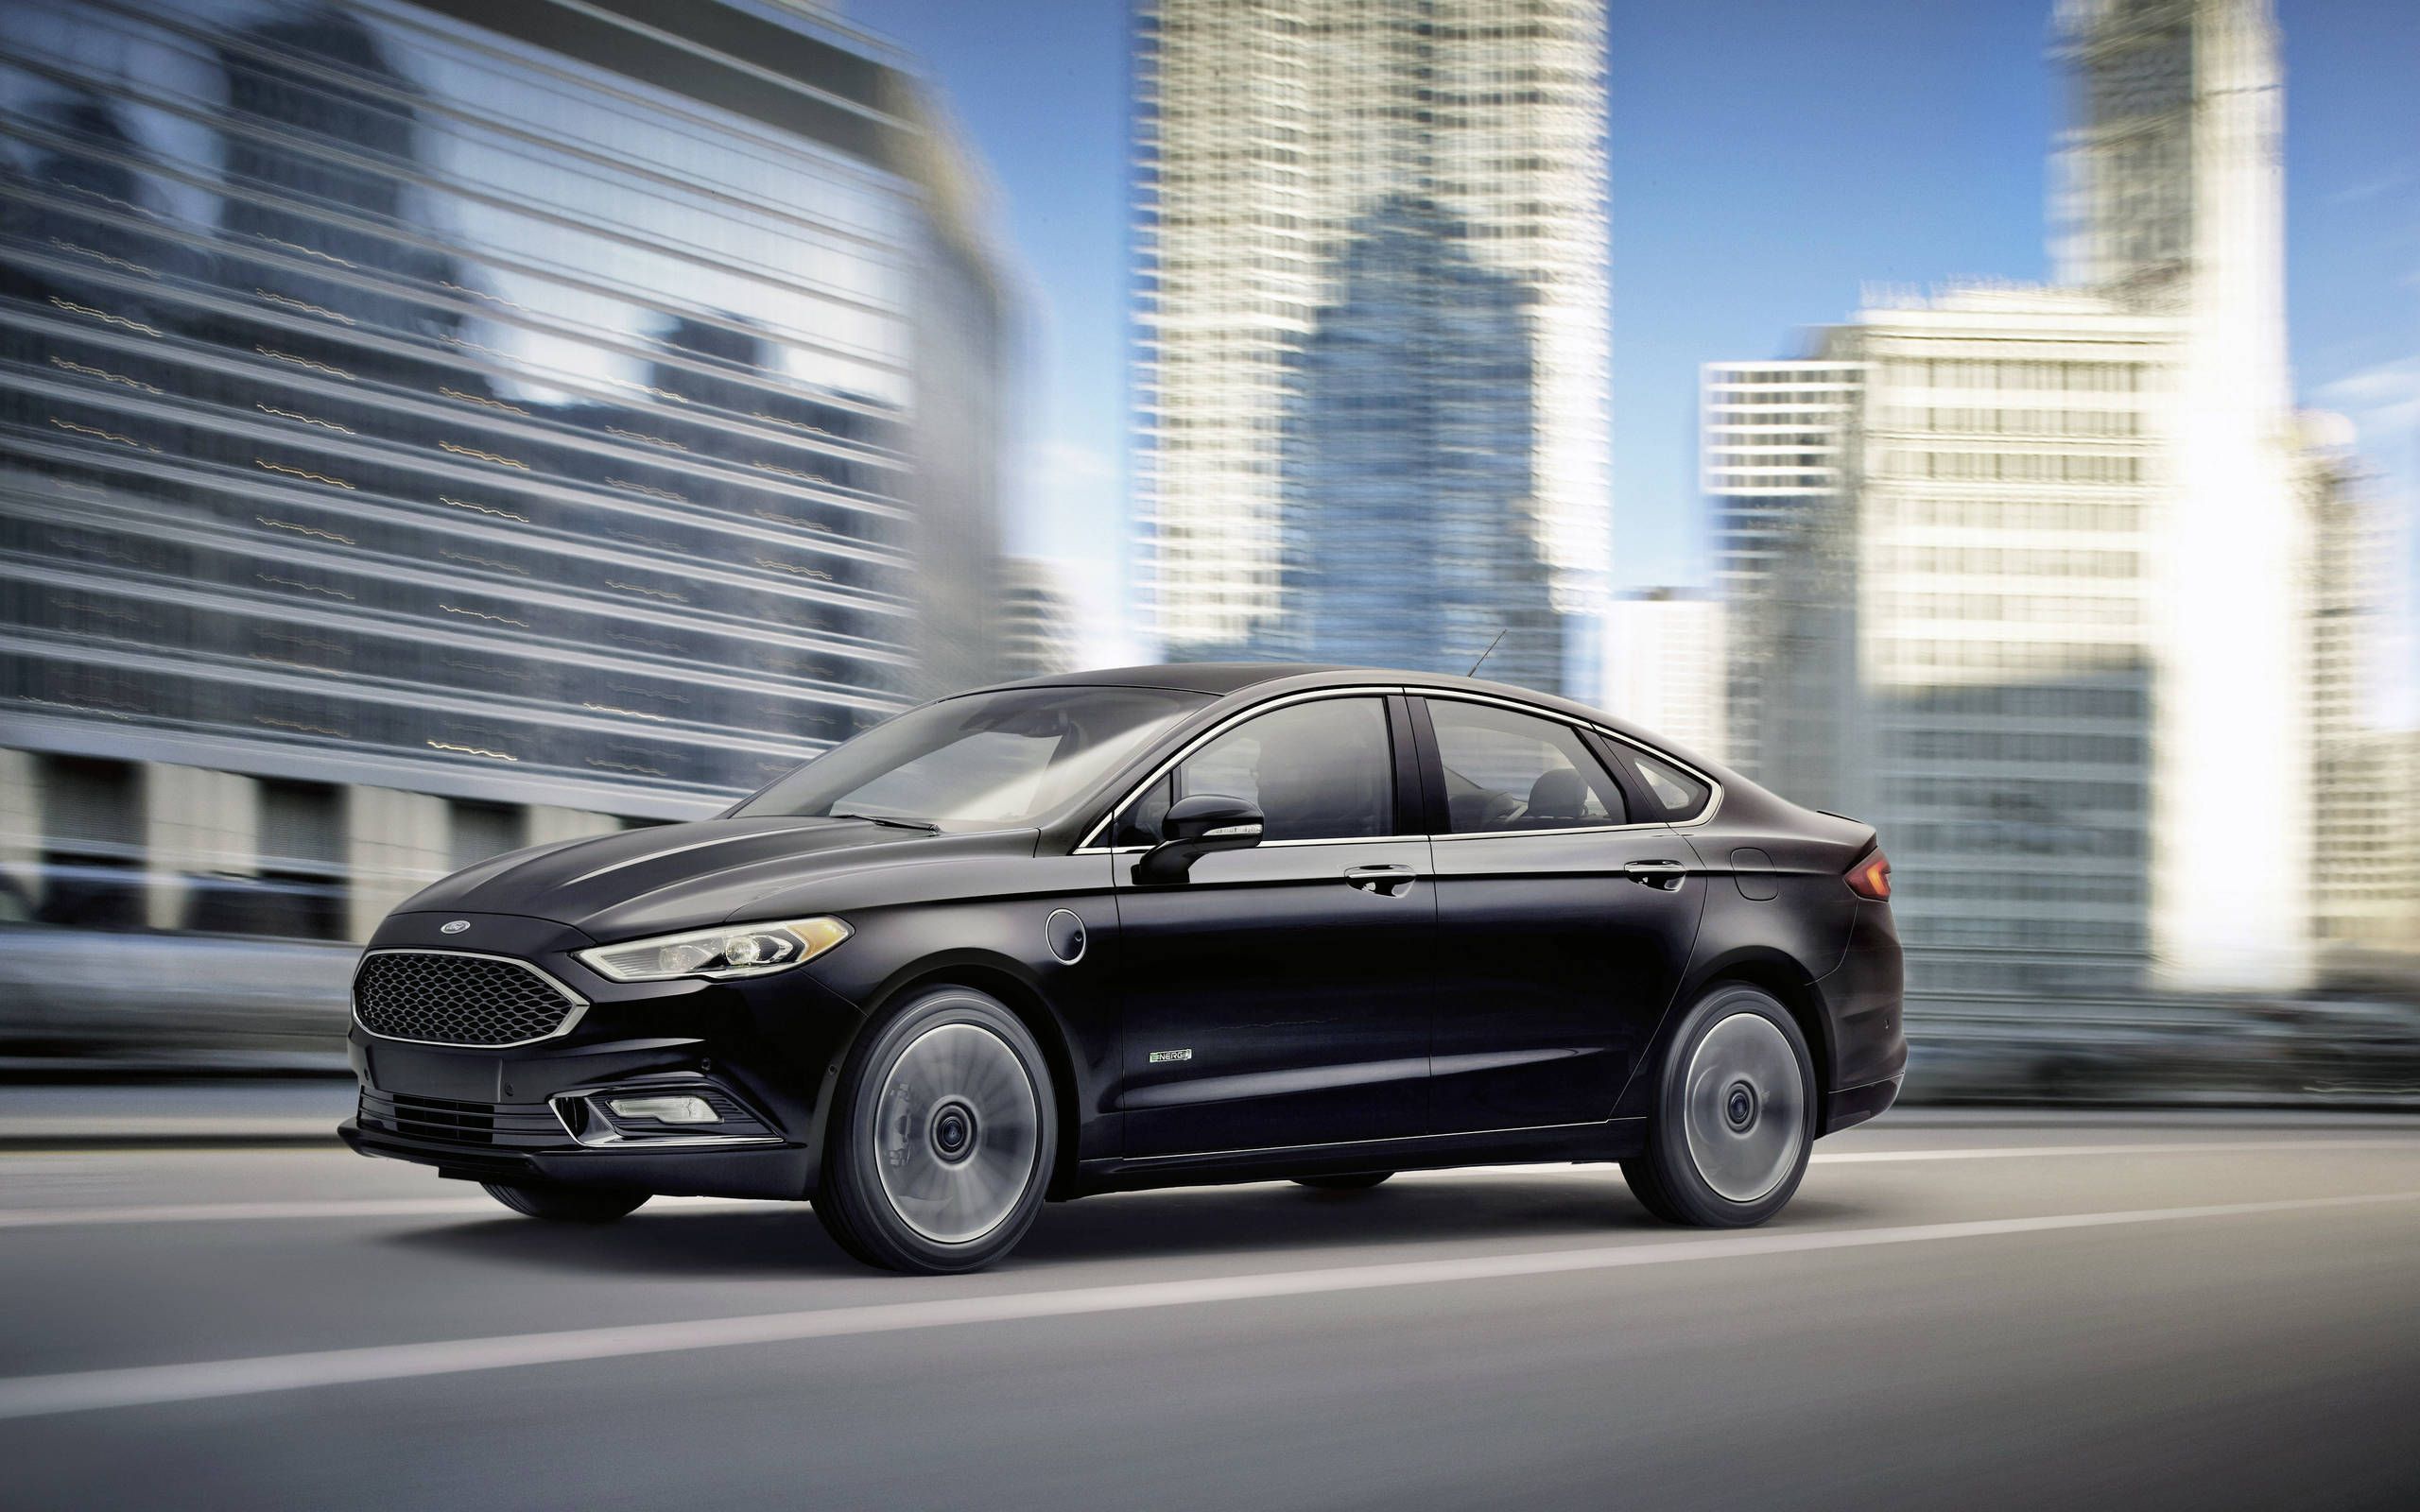 2017 Ford Fusion Hybrid Review & Ratings